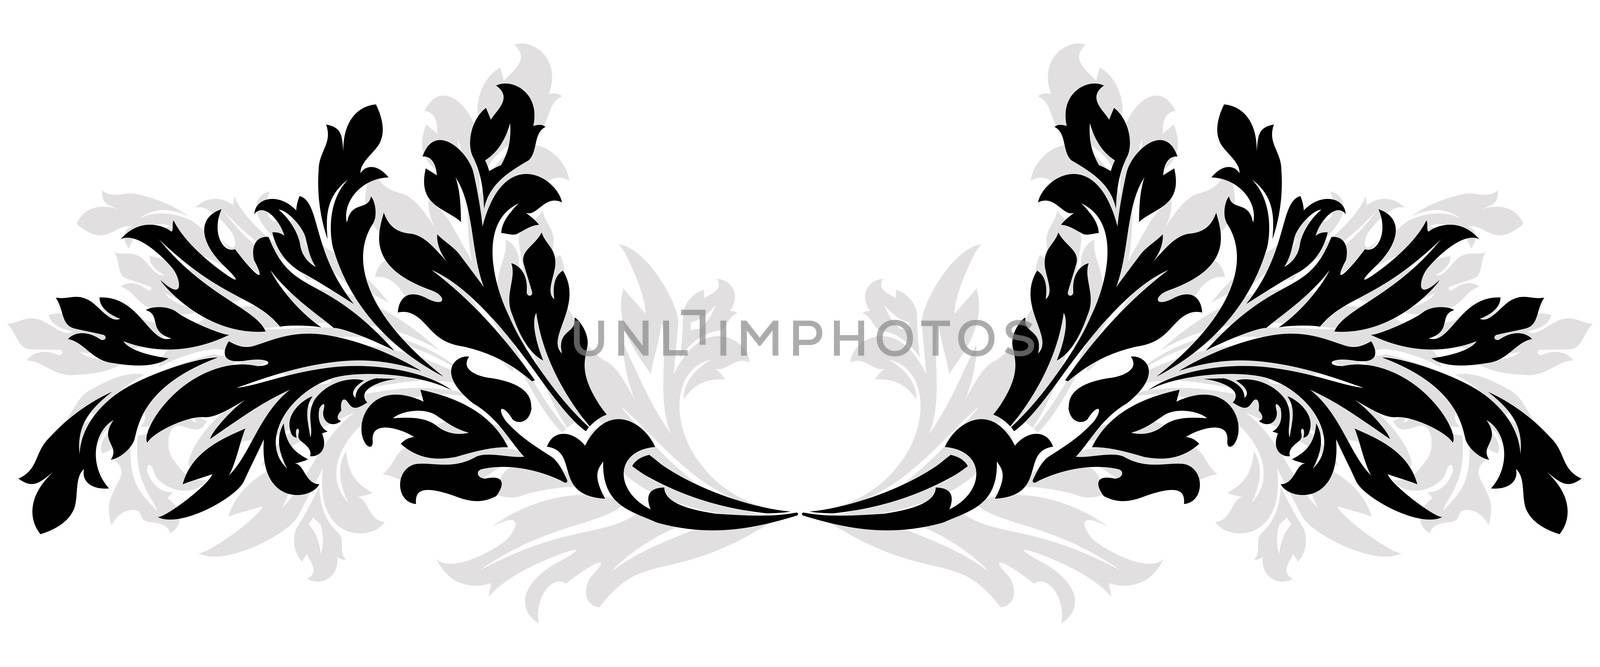 Abstract ancient floral Garland isolated on white